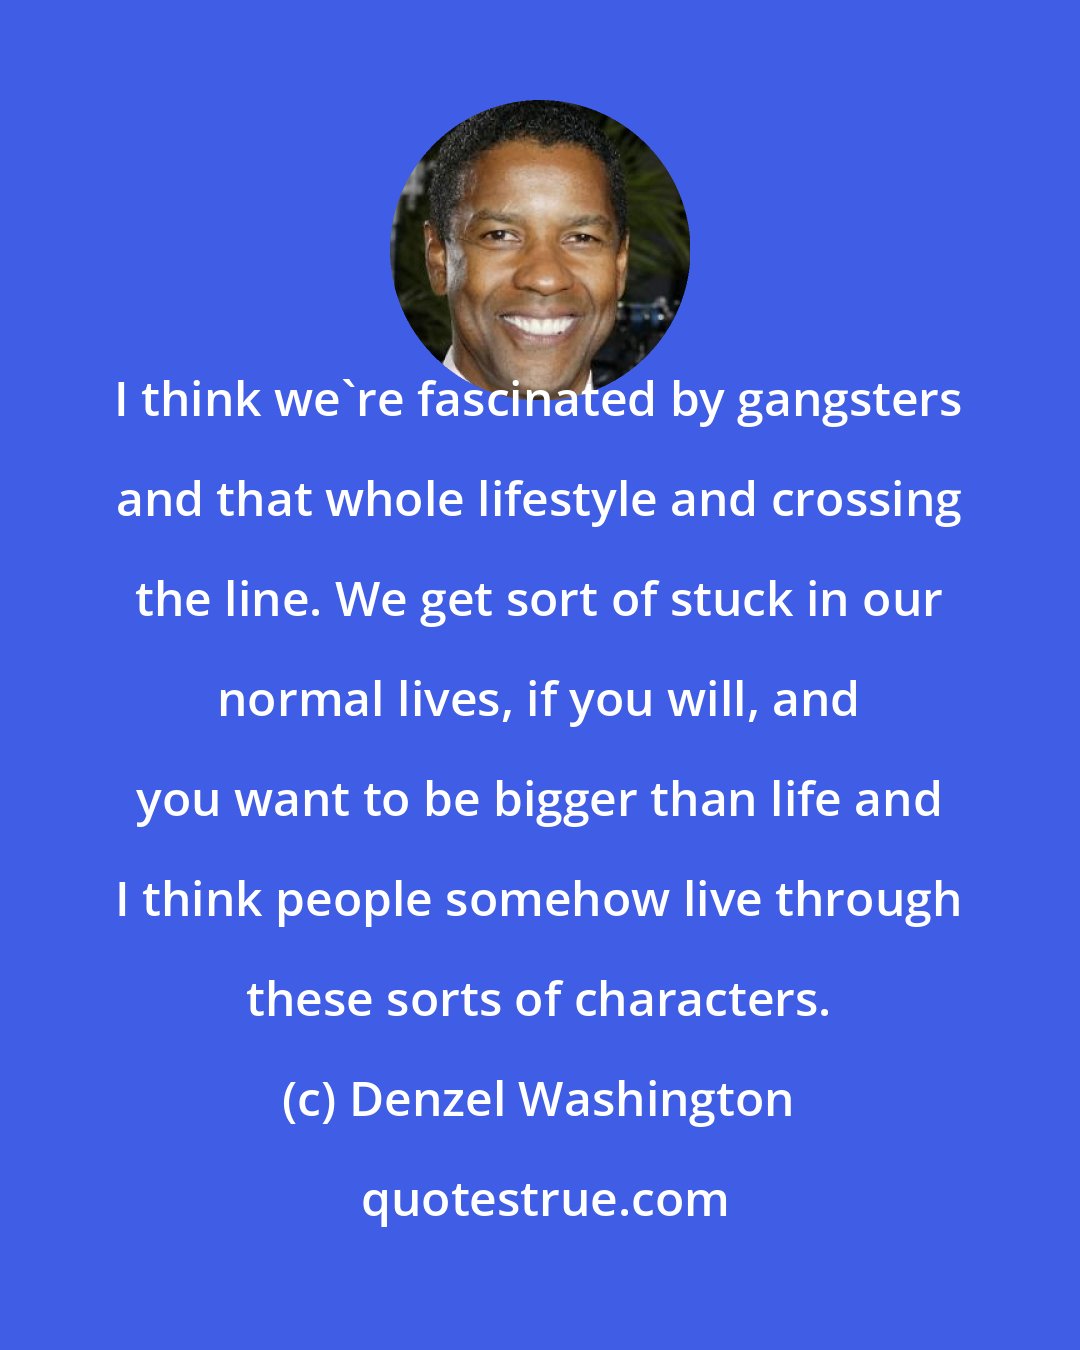 Denzel Washington: I think we're fascinated by gangsters and that whole lifestyle and crossing the line. We get sort of stuck in our normal lives, if you will, and you want to be bigger than life and I think people somehow live through these sorts of characters.